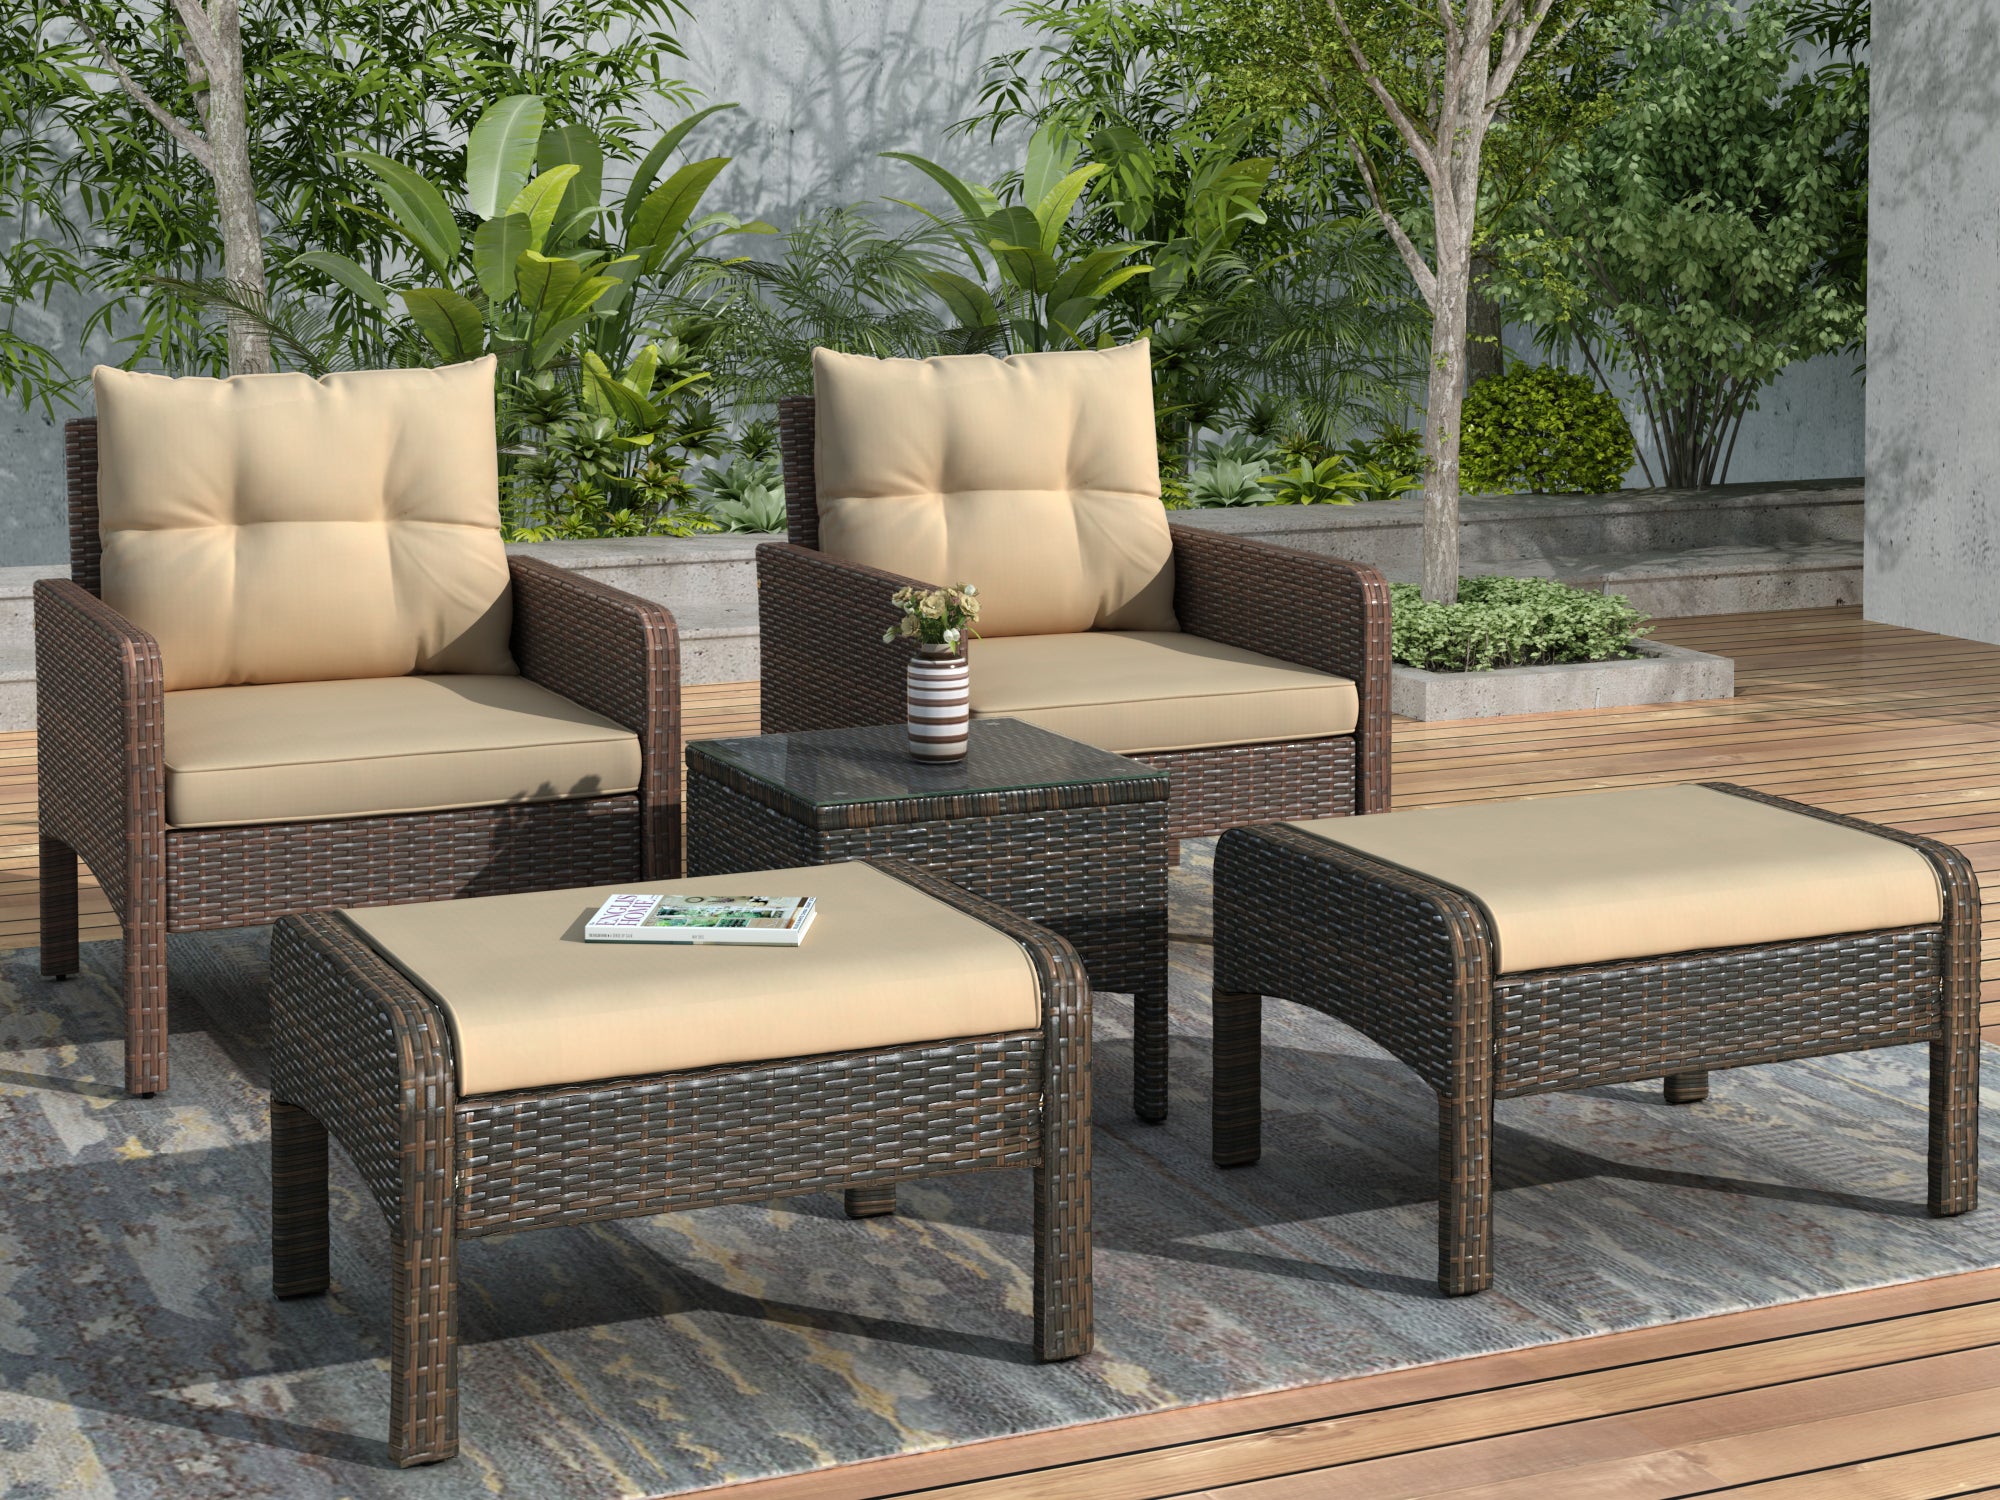 TOPMAX 5-Piece PE Rattan Wicker Outdoor Patio Furniture Set with Glass Table